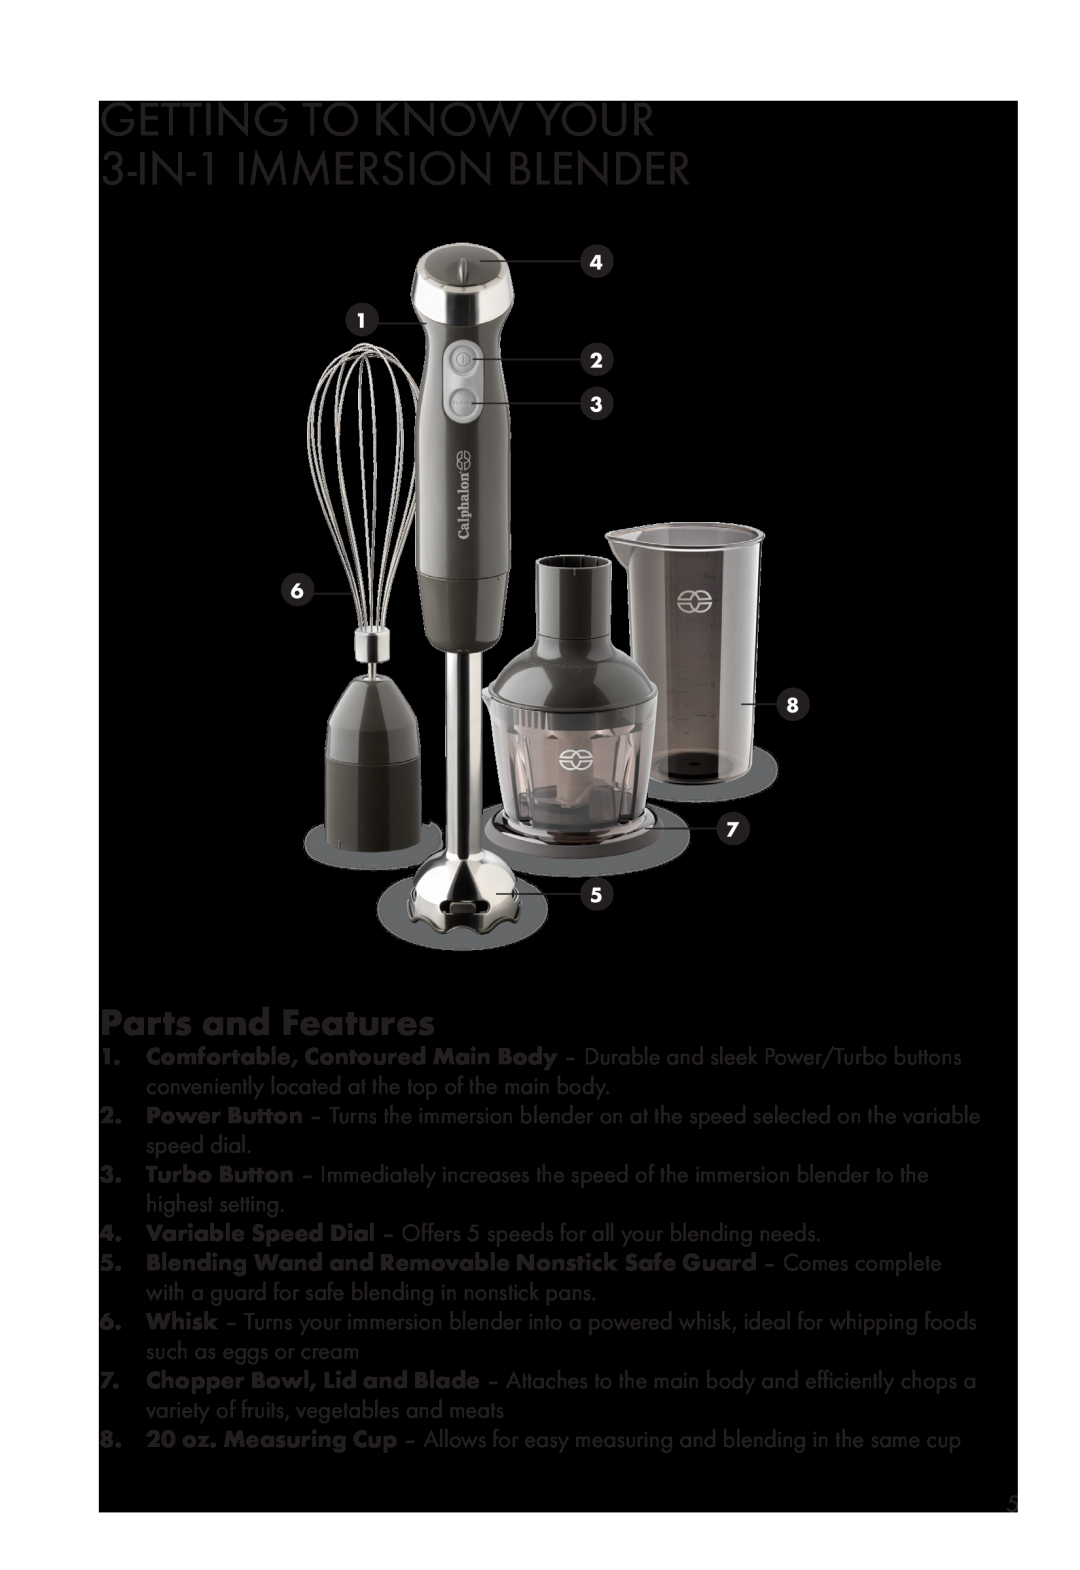 Calphalon ME2501B manual GETTING TO KNOW YOUR 3-IN-1 IMMERSION BLENDER, Parts and Features 